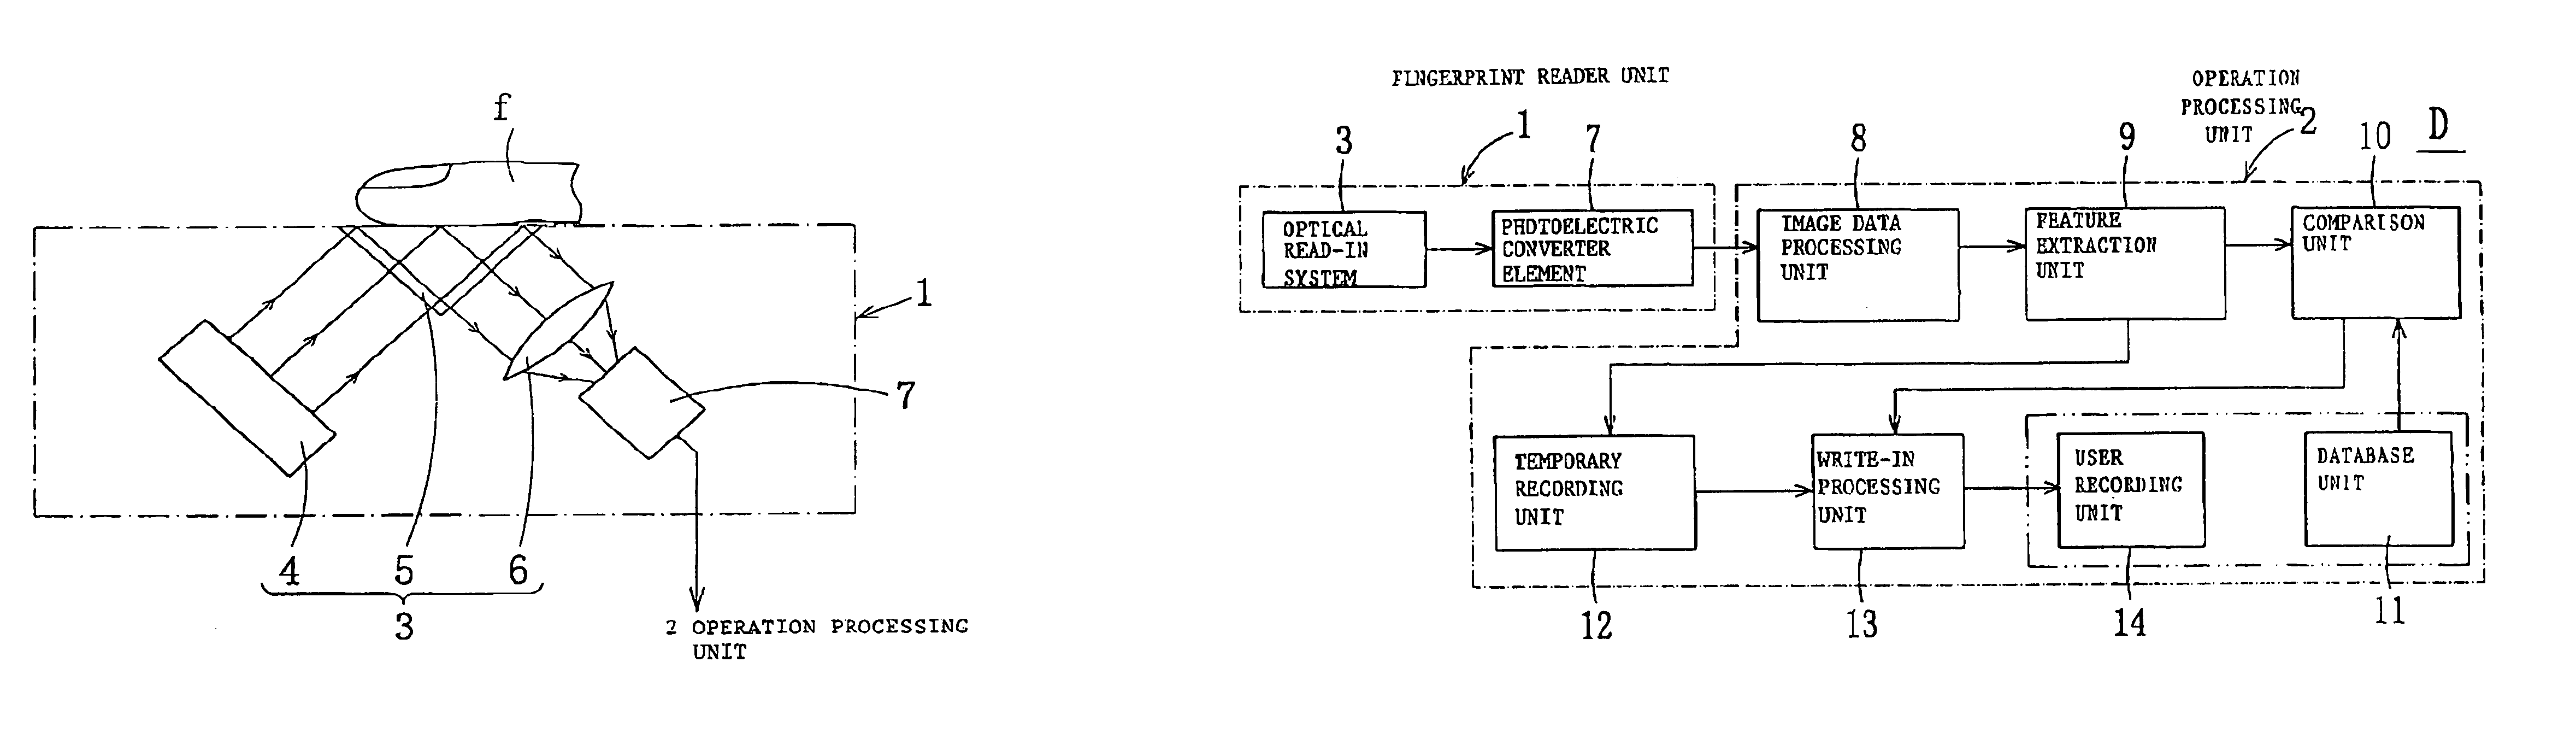 Fingerprint identification device equipped with a user recording unit